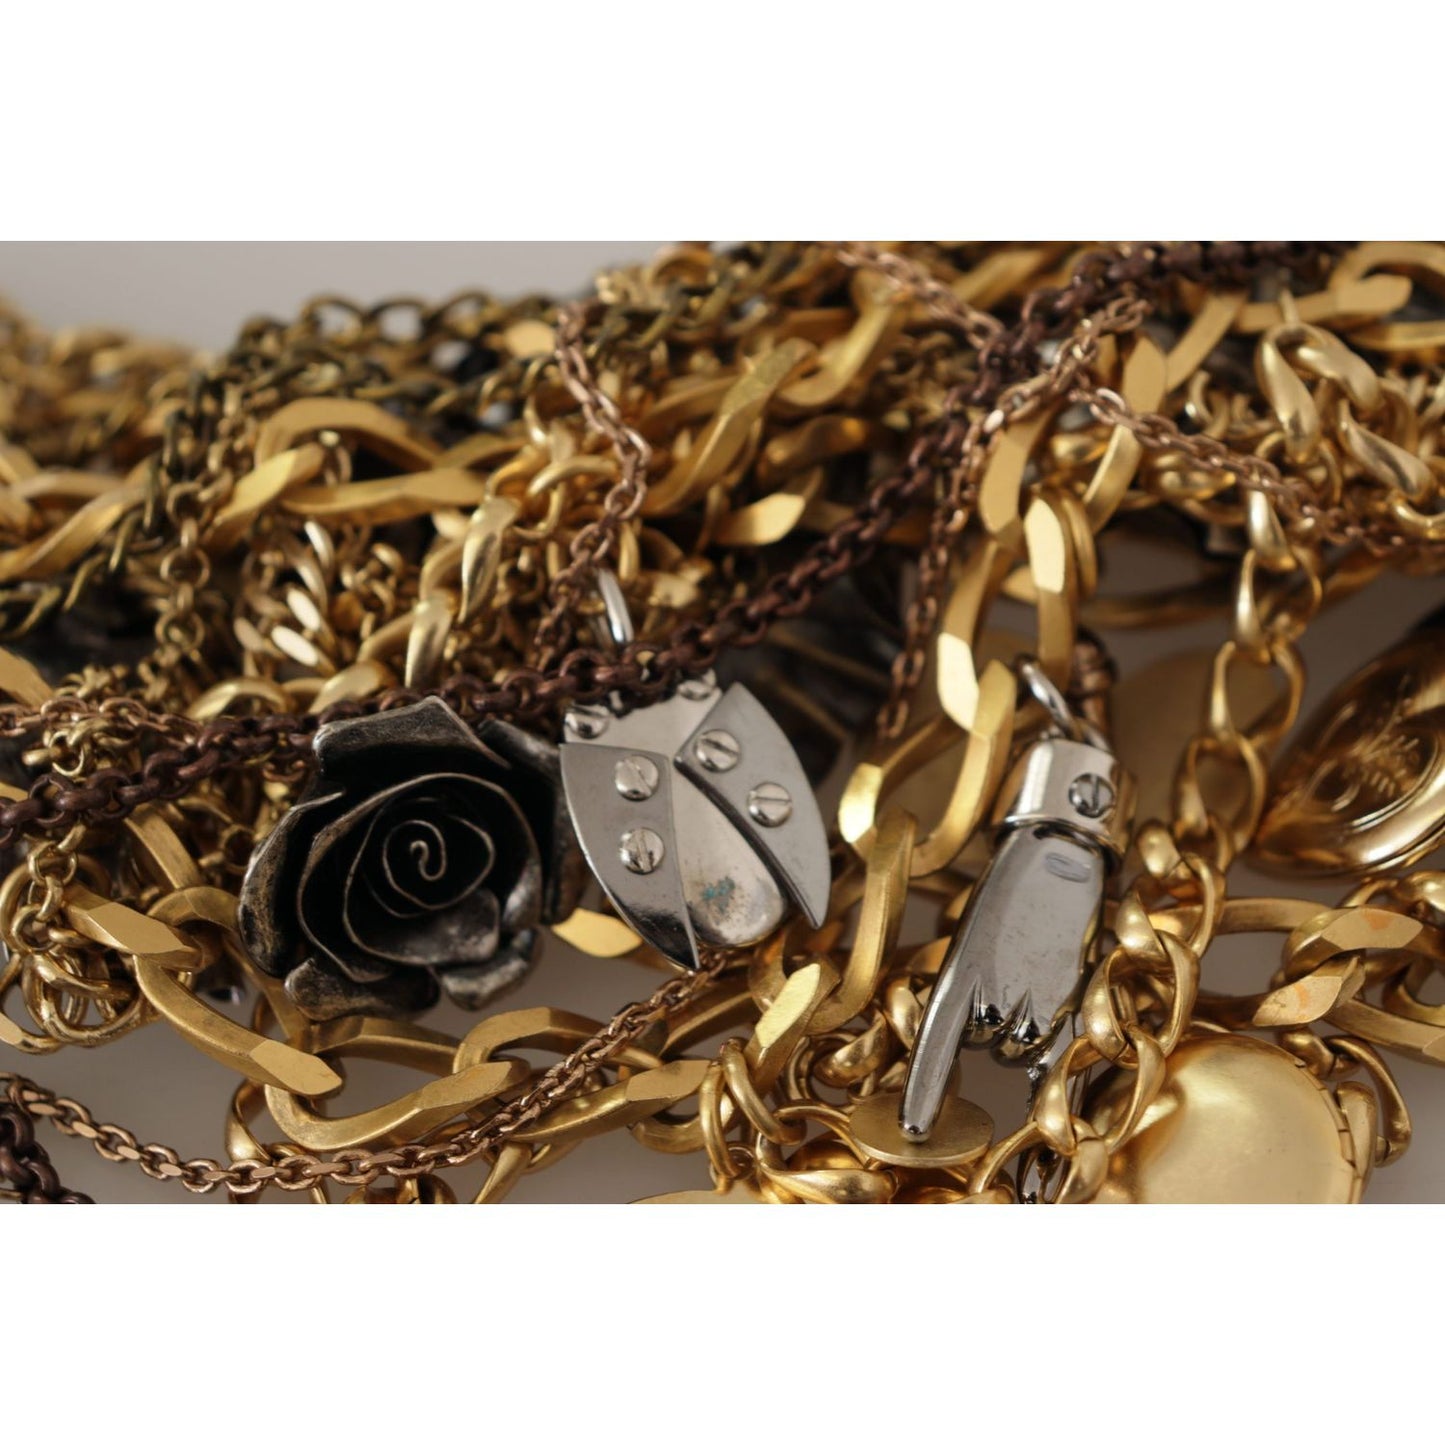 WOMAN NECKLACE Sicilian Glamour Gold Statement Necklace Dolce & Gabbana